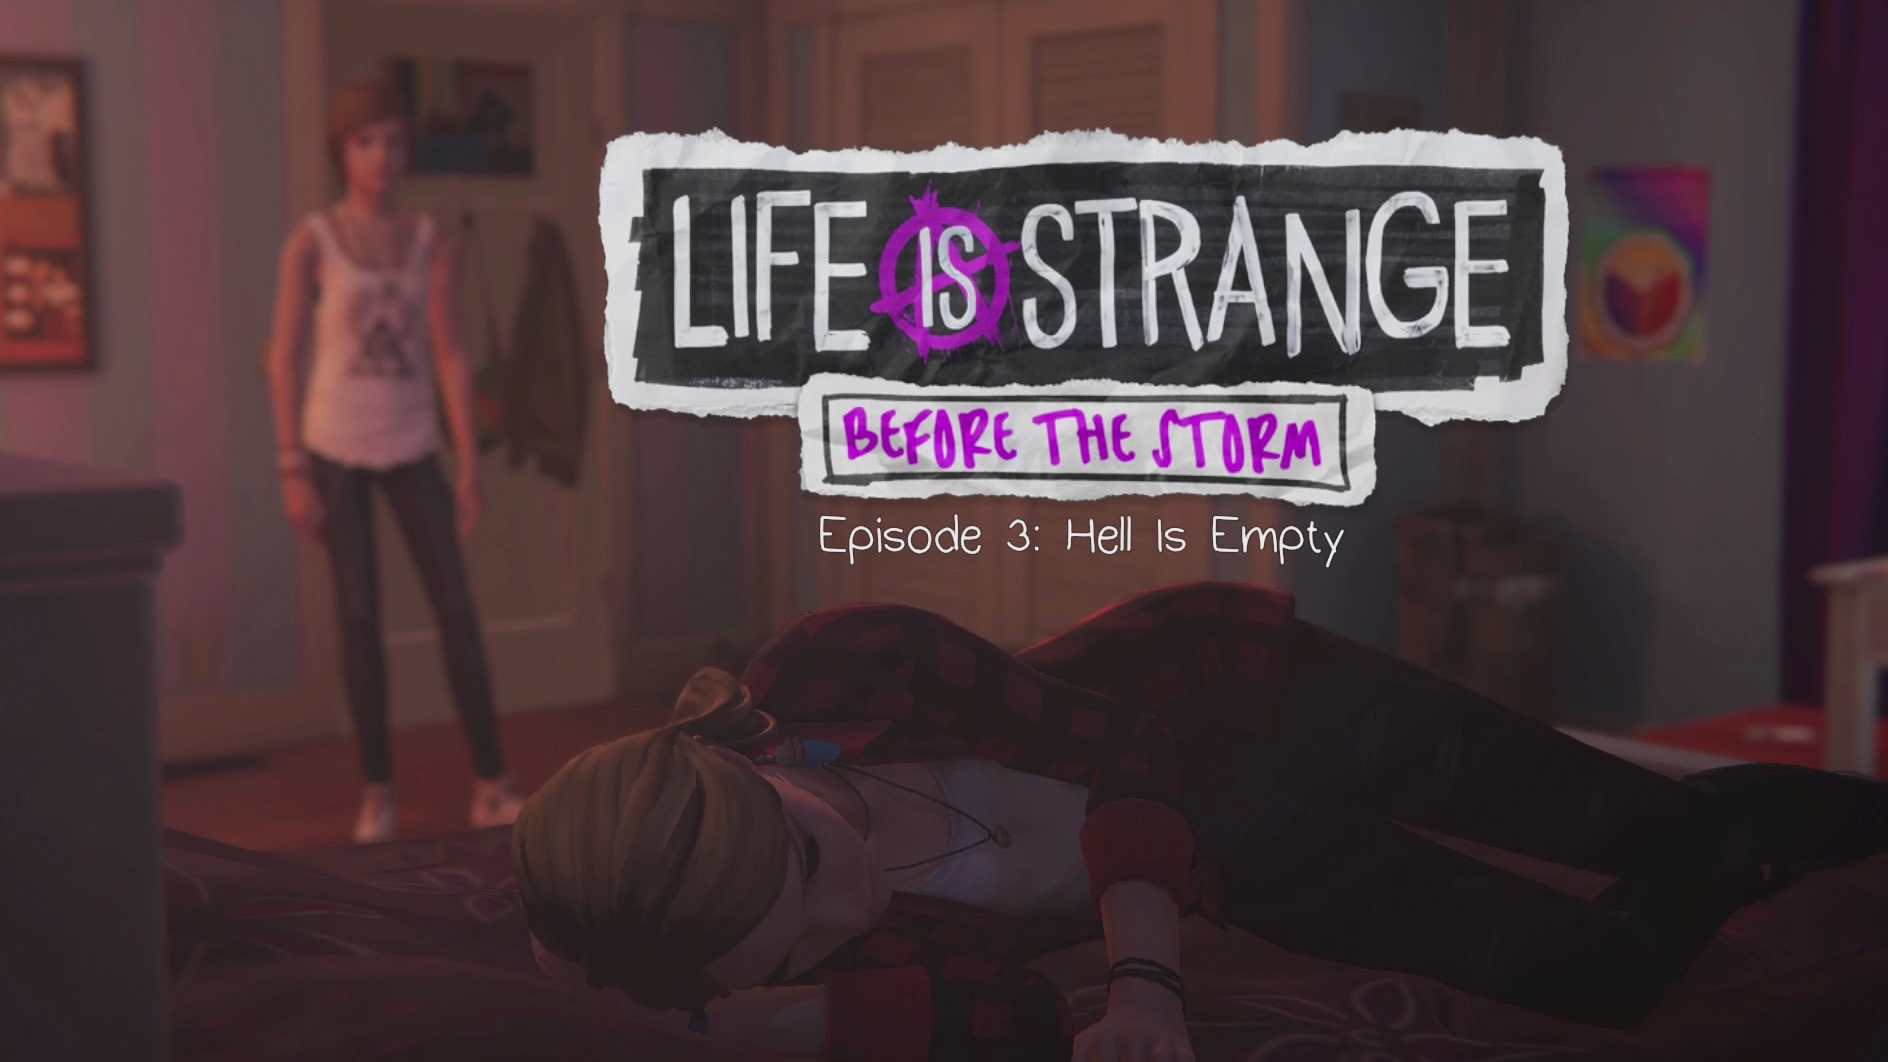 Life is Strange: Before the Storm Episode 3 Review